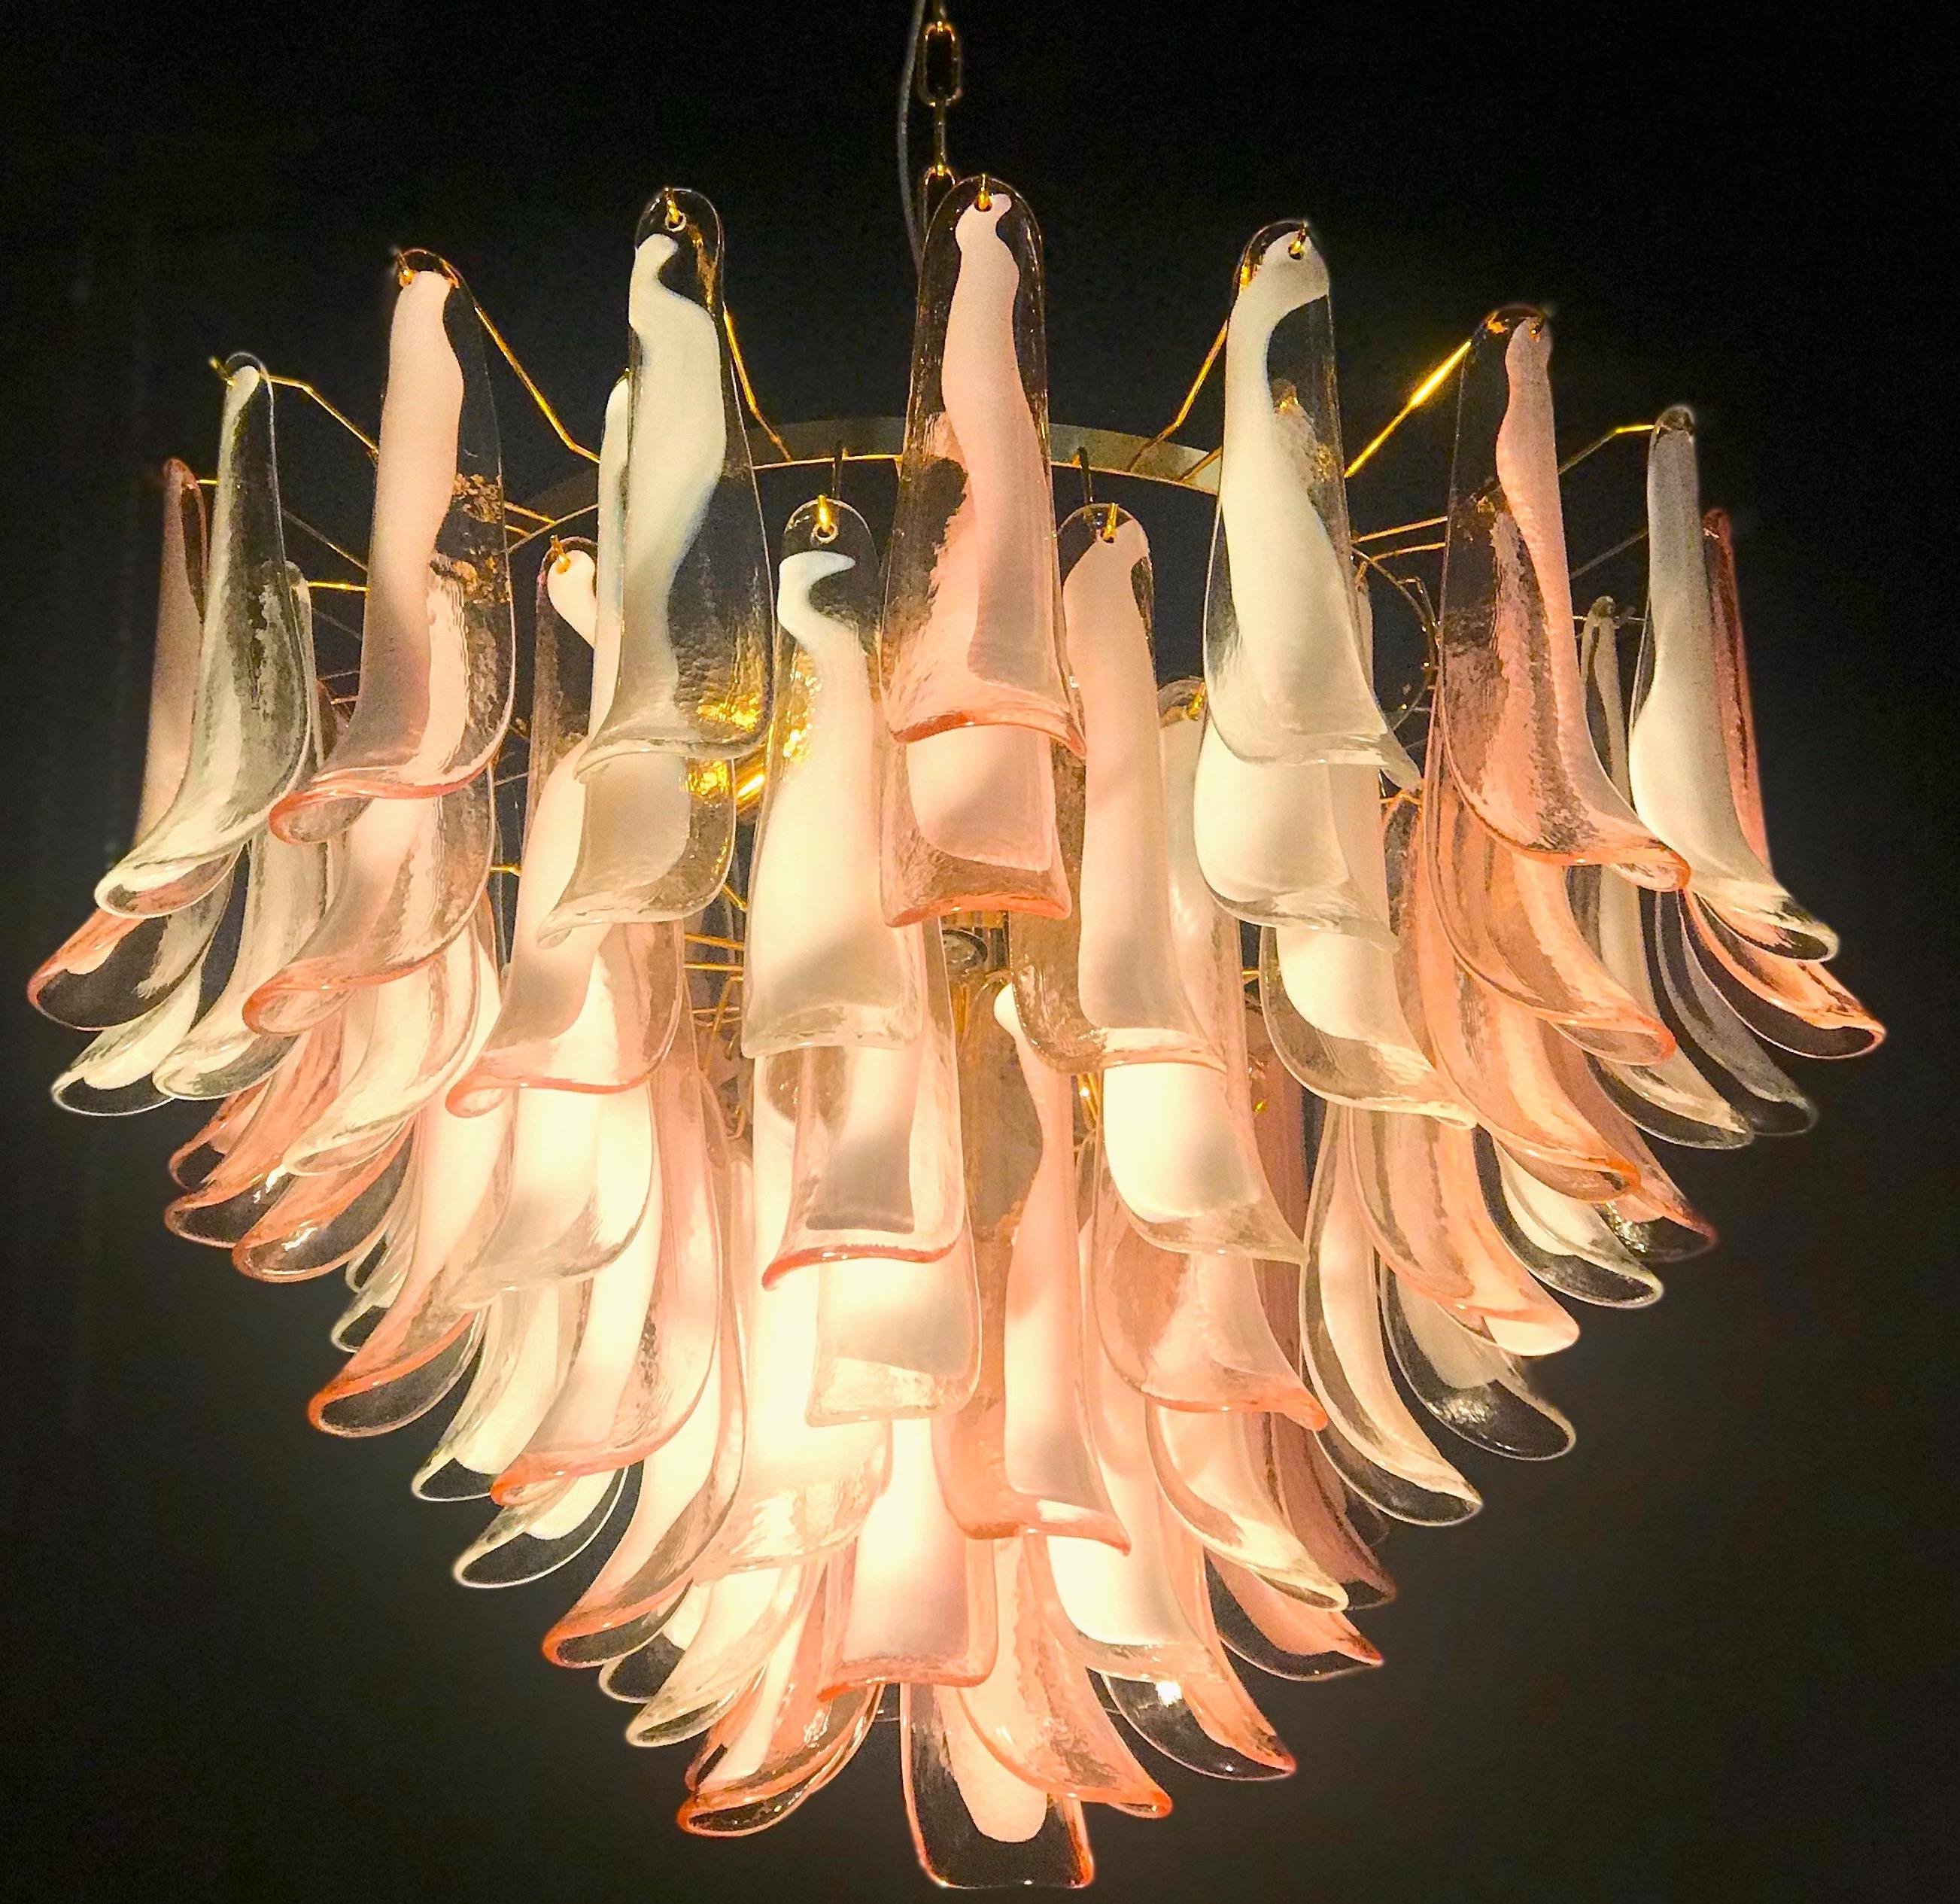 Fabulous Italian chandelier Made by 90 pink and white lattimo Murano glass petals supported by a brass frame by Galleria Veneziani.
We can customize the frame, brass or bhrome 

Dimensions: 51.20 inches (130 cm) height with chain, 28 inches (70